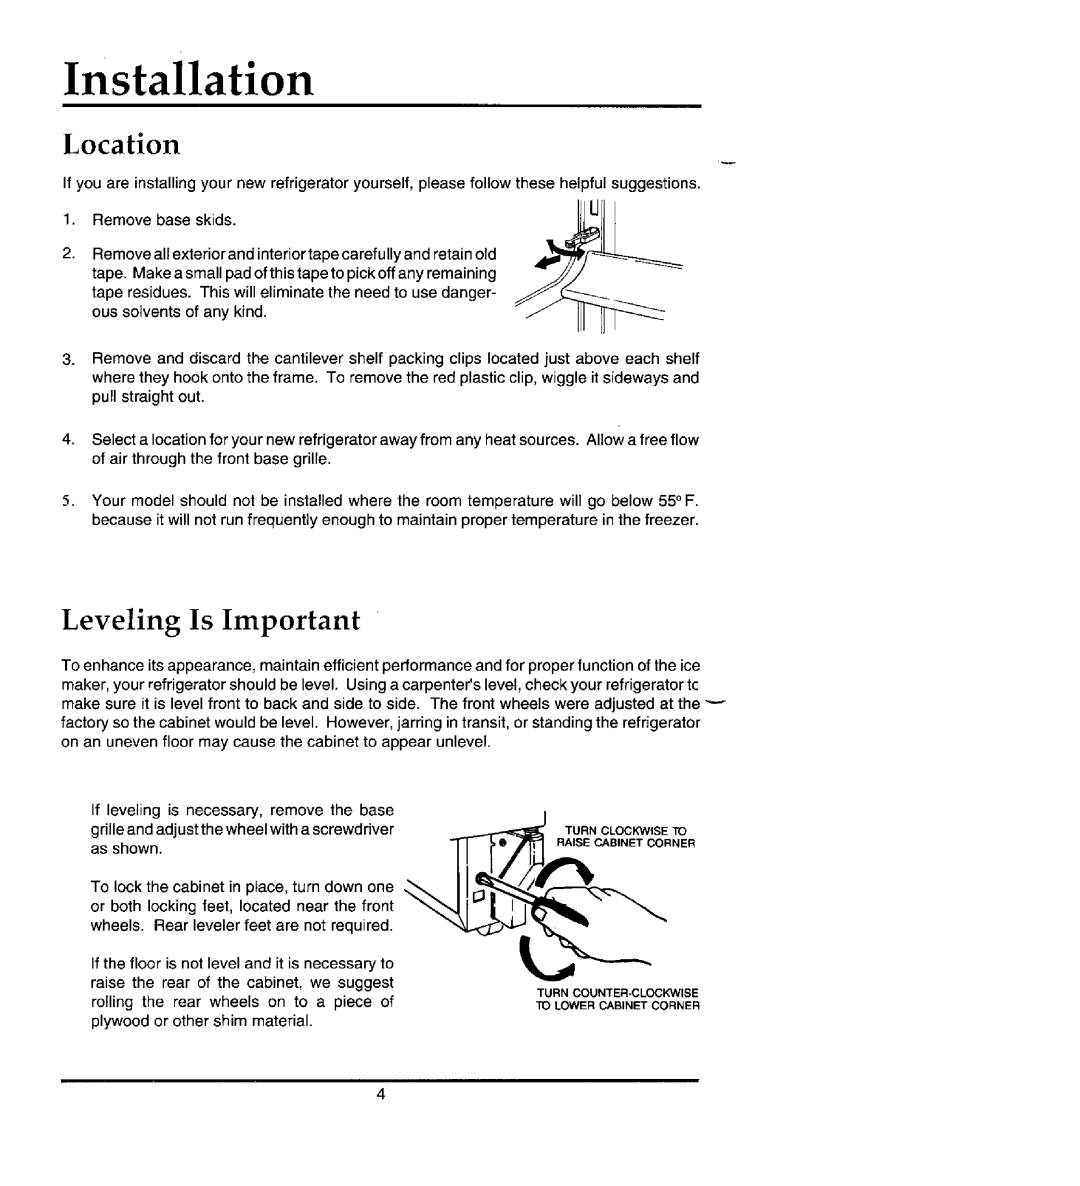 Jenn-Air JRTDE228 Installation, Location, Leveling Is Important, If leveling is necessary, remove the base, as shown, Turn 